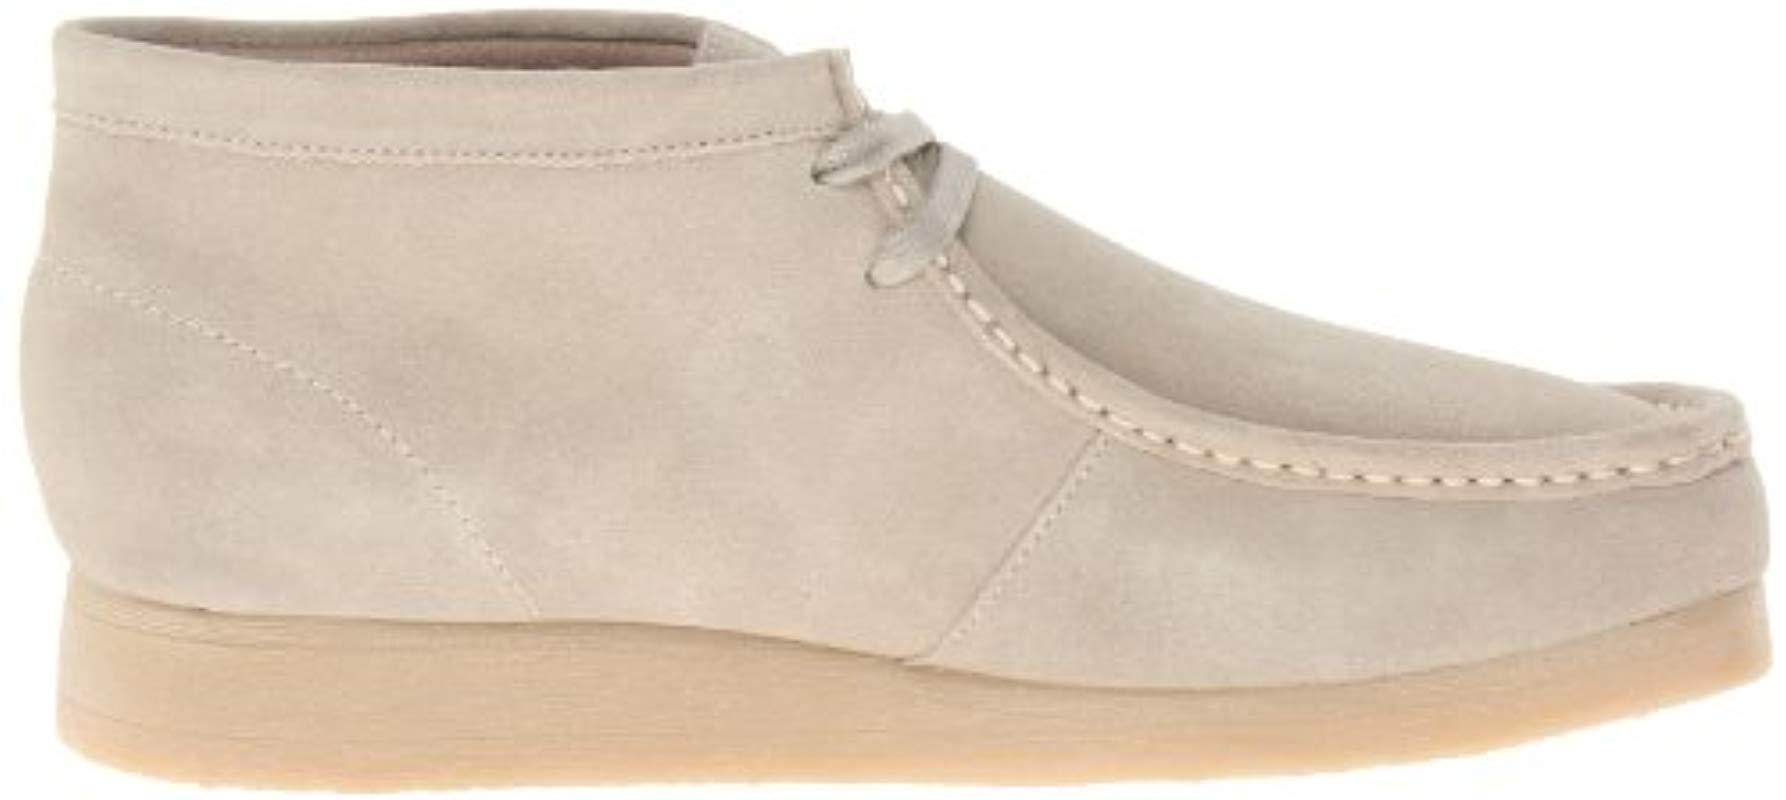 Clarks Stinson Hi Chukka Boot,sand Suede,8 M Us in Natural for Men | Lyst